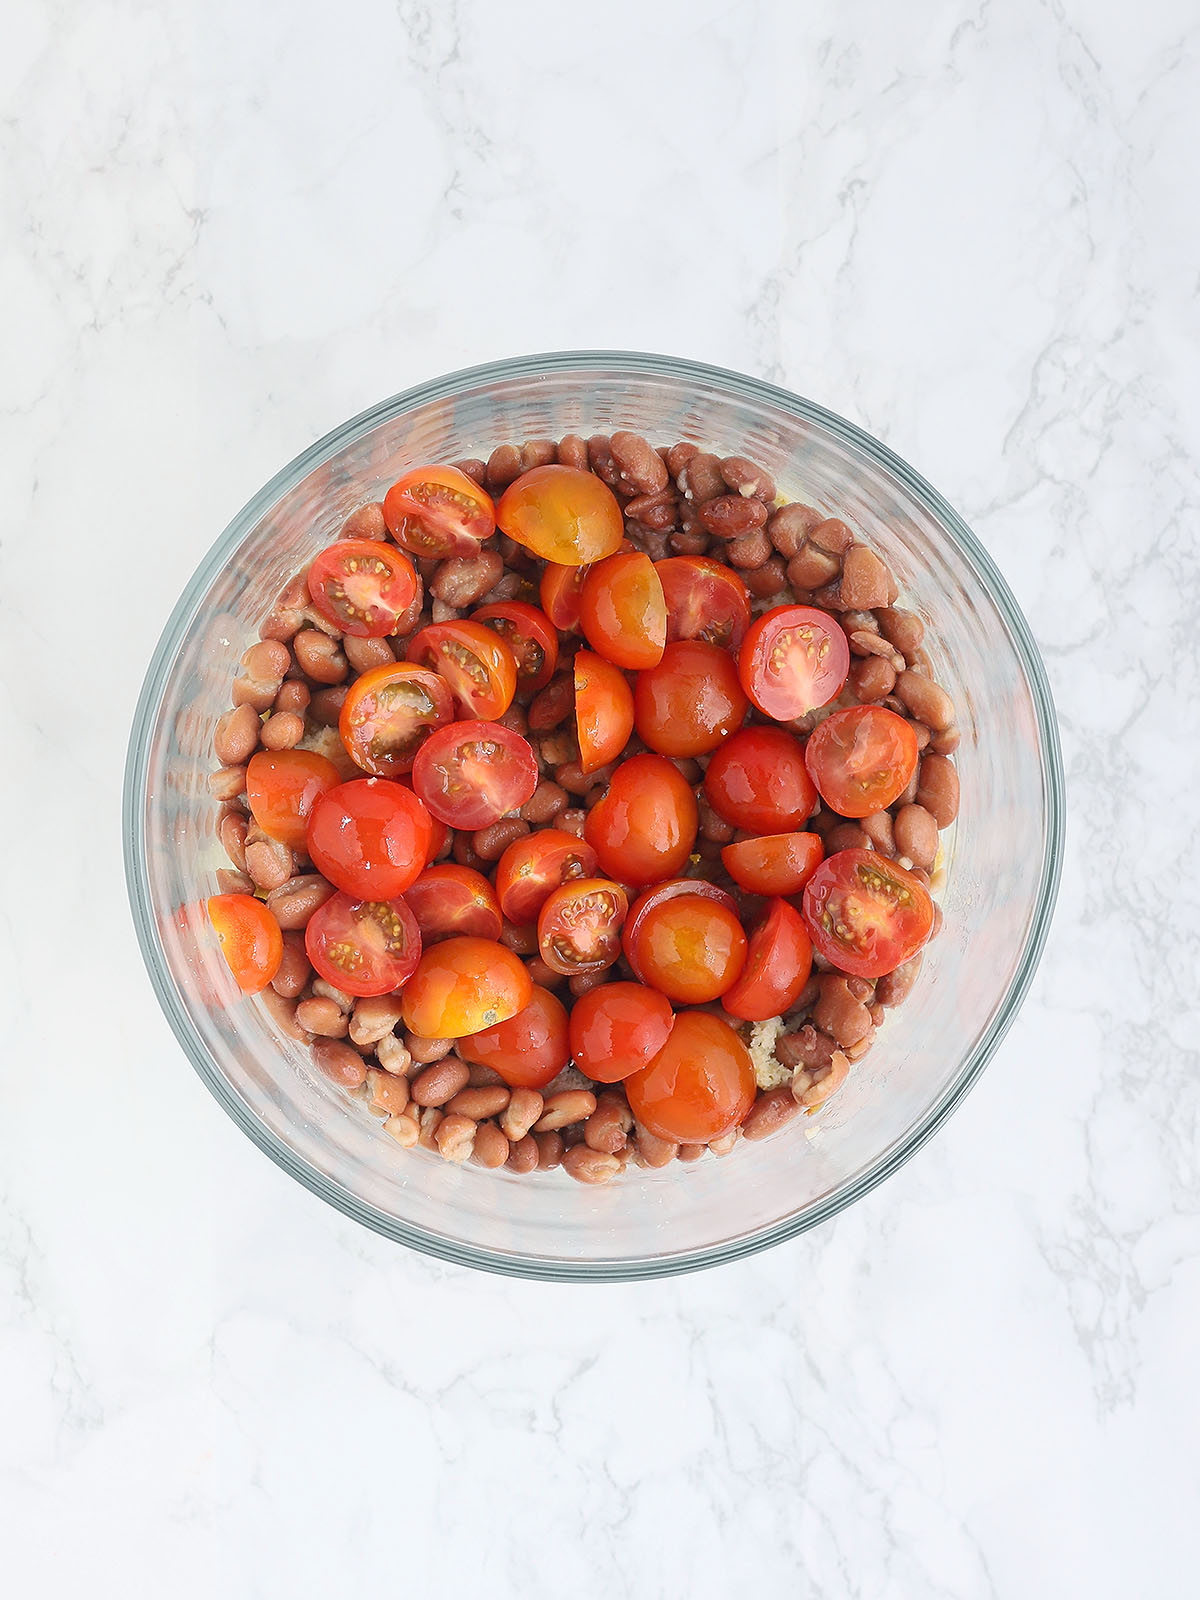 cornbread salad topped with cherry tomatoes